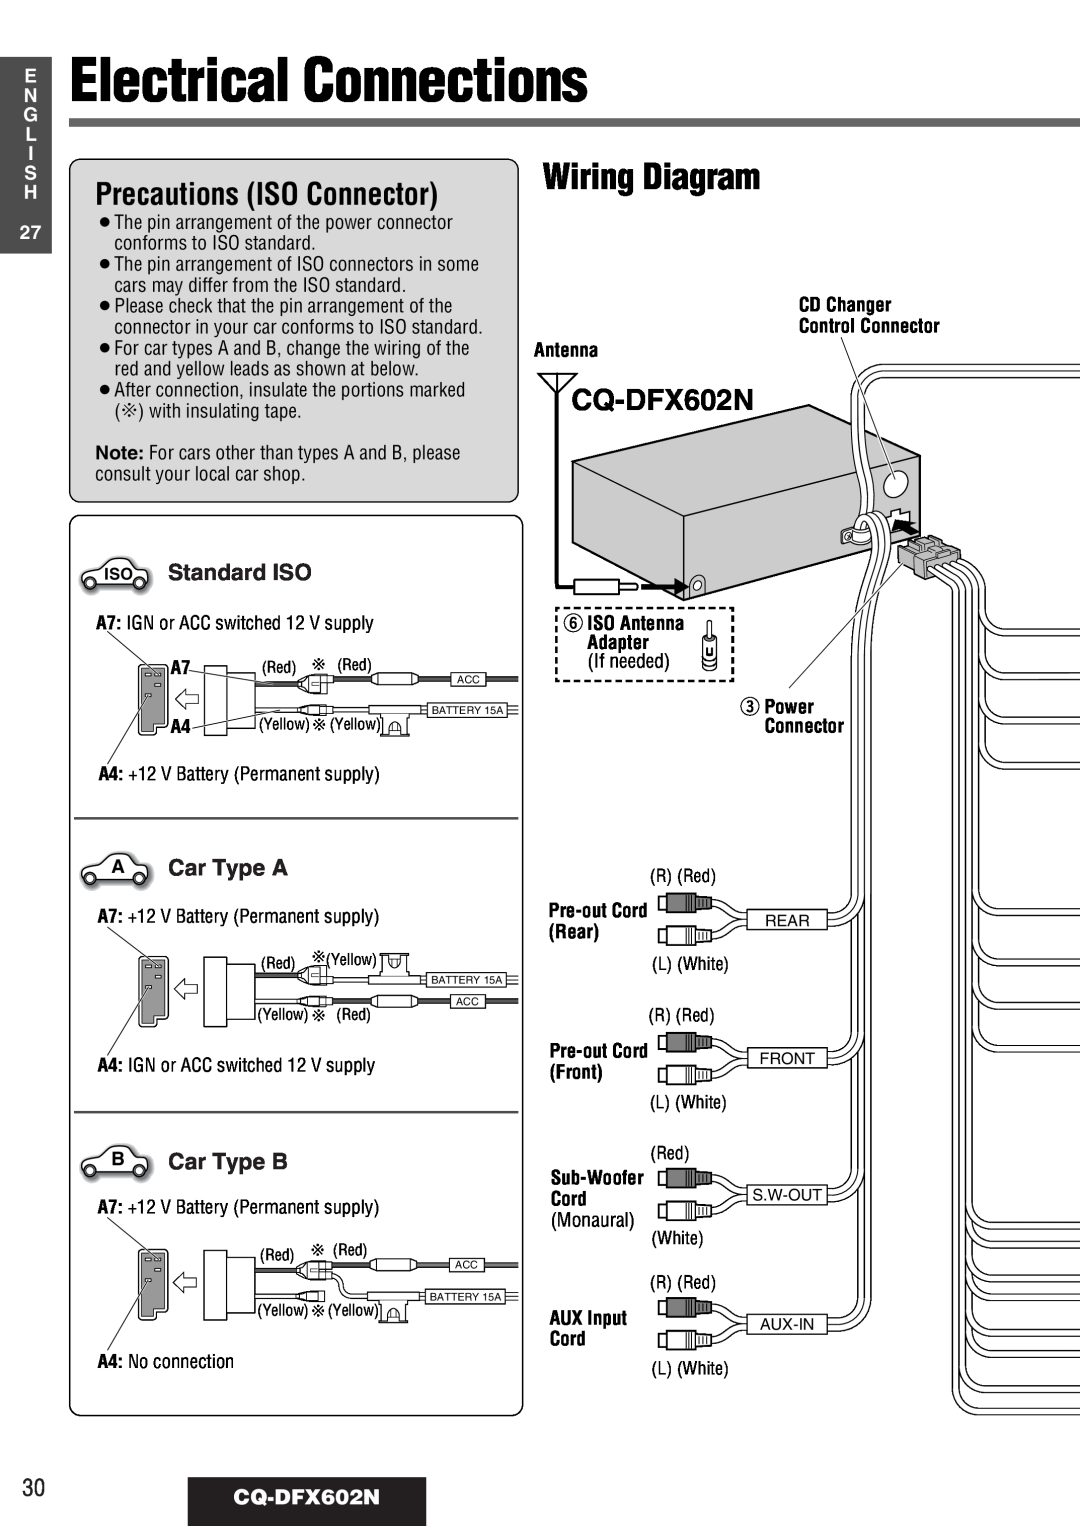 Panasonic Electrical Connections, Precautions ISO Connector, Wiring Diagram, 30CQ-DFX602N, Standard ISO, Car Type A 